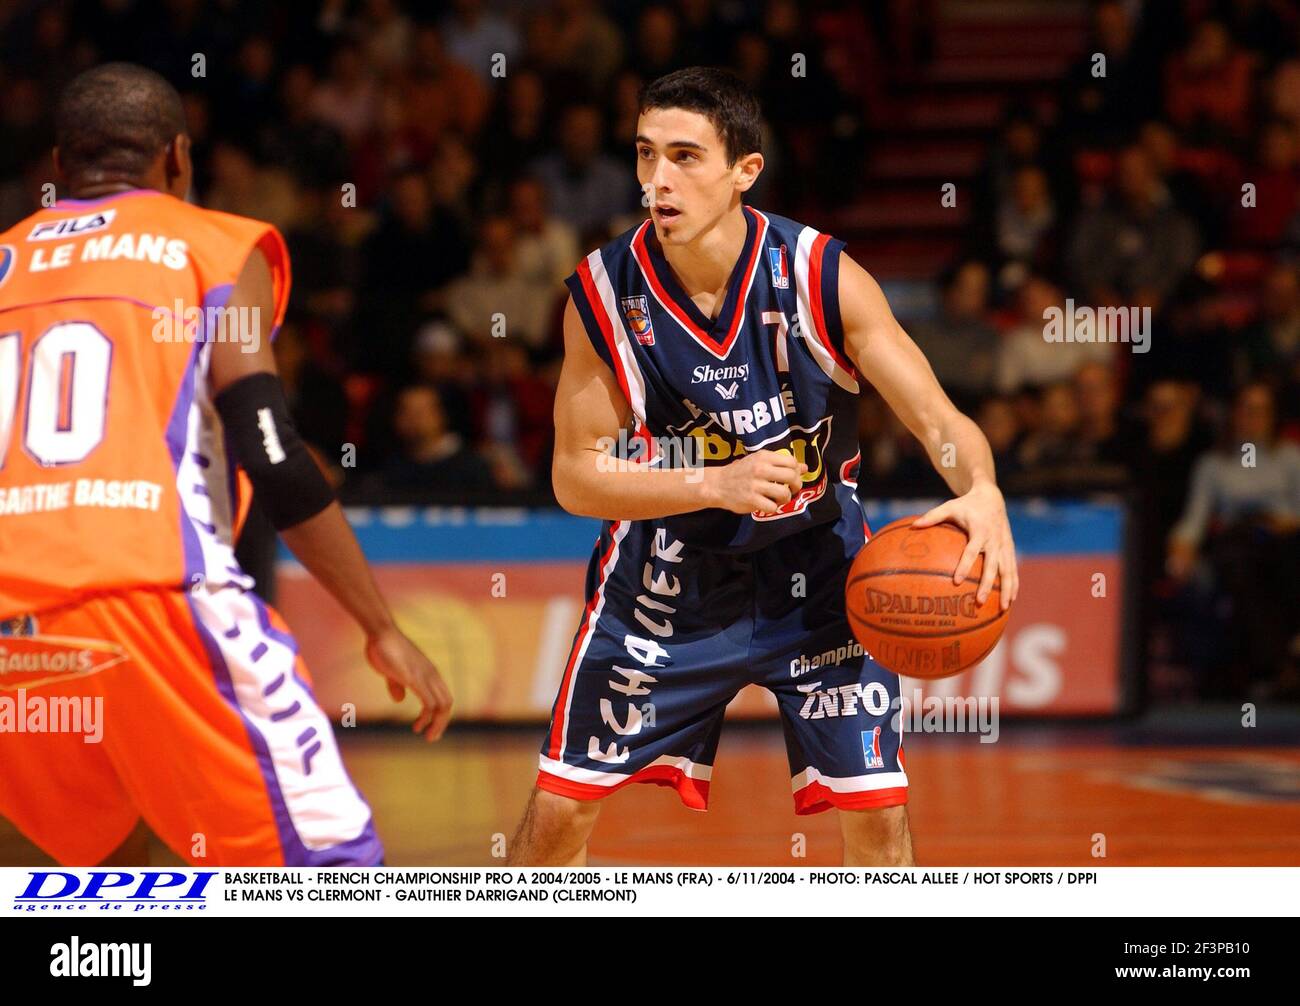 BASKETBALL - FRENCH CHAMPIONSHIP PRO A 2004/2005 - LE MANS (FRA) -  6/11/2004 - PHOTO: PASCAL ALLEE / HOT SPORTS / DPPI LE MANS VS CLERMONT -  GAUTHIER DARRIGAND (CLERMONT Stock Photo - Alamy